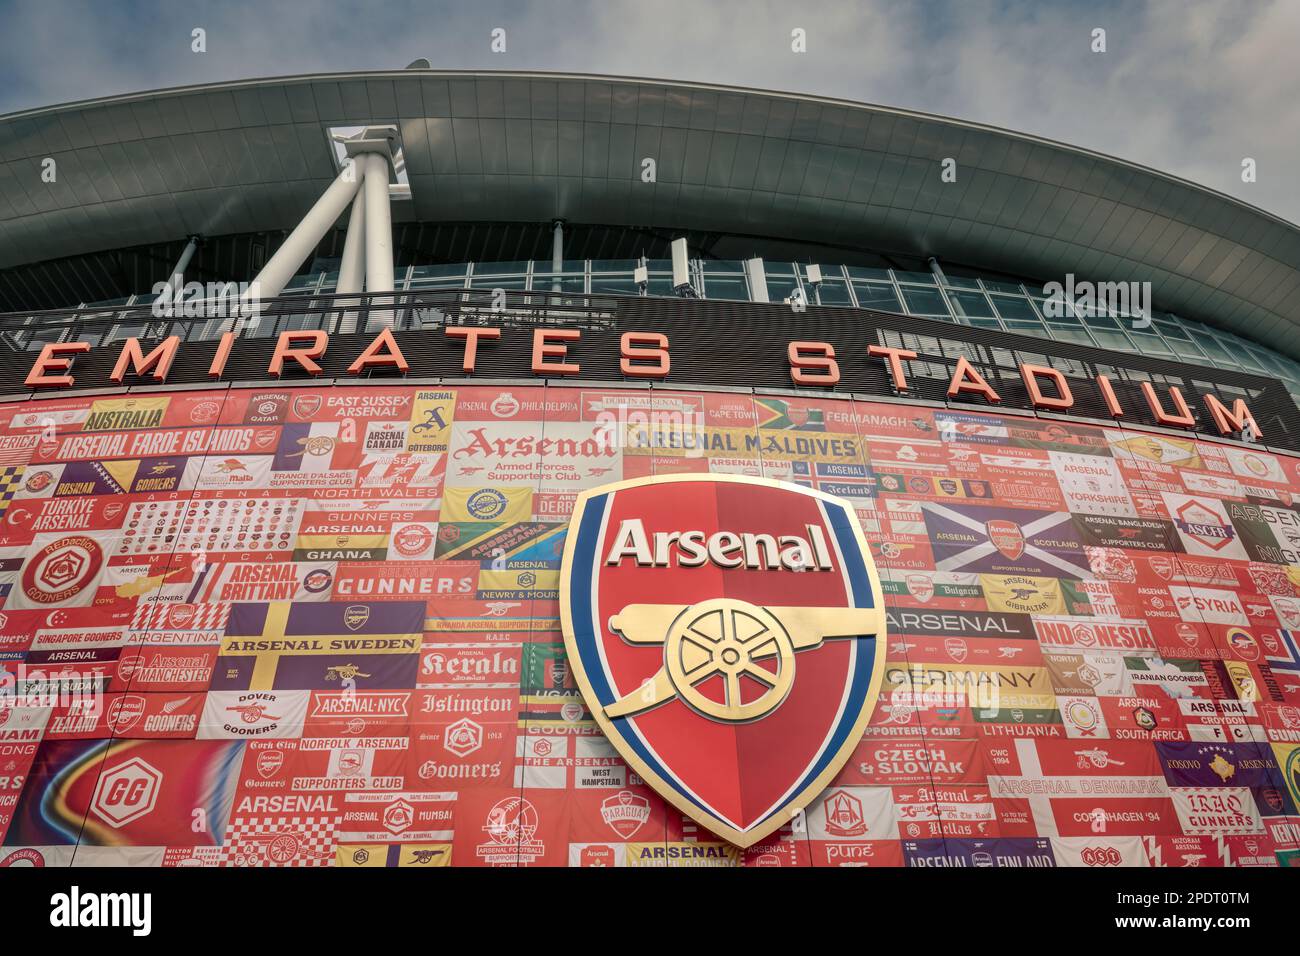 The Emirates Stadium is home to Premiership Team Arsenal Football Club, situated in Holloway, Islington, London. Known as 'The Gunners', Arsenal reloc Stock Photo